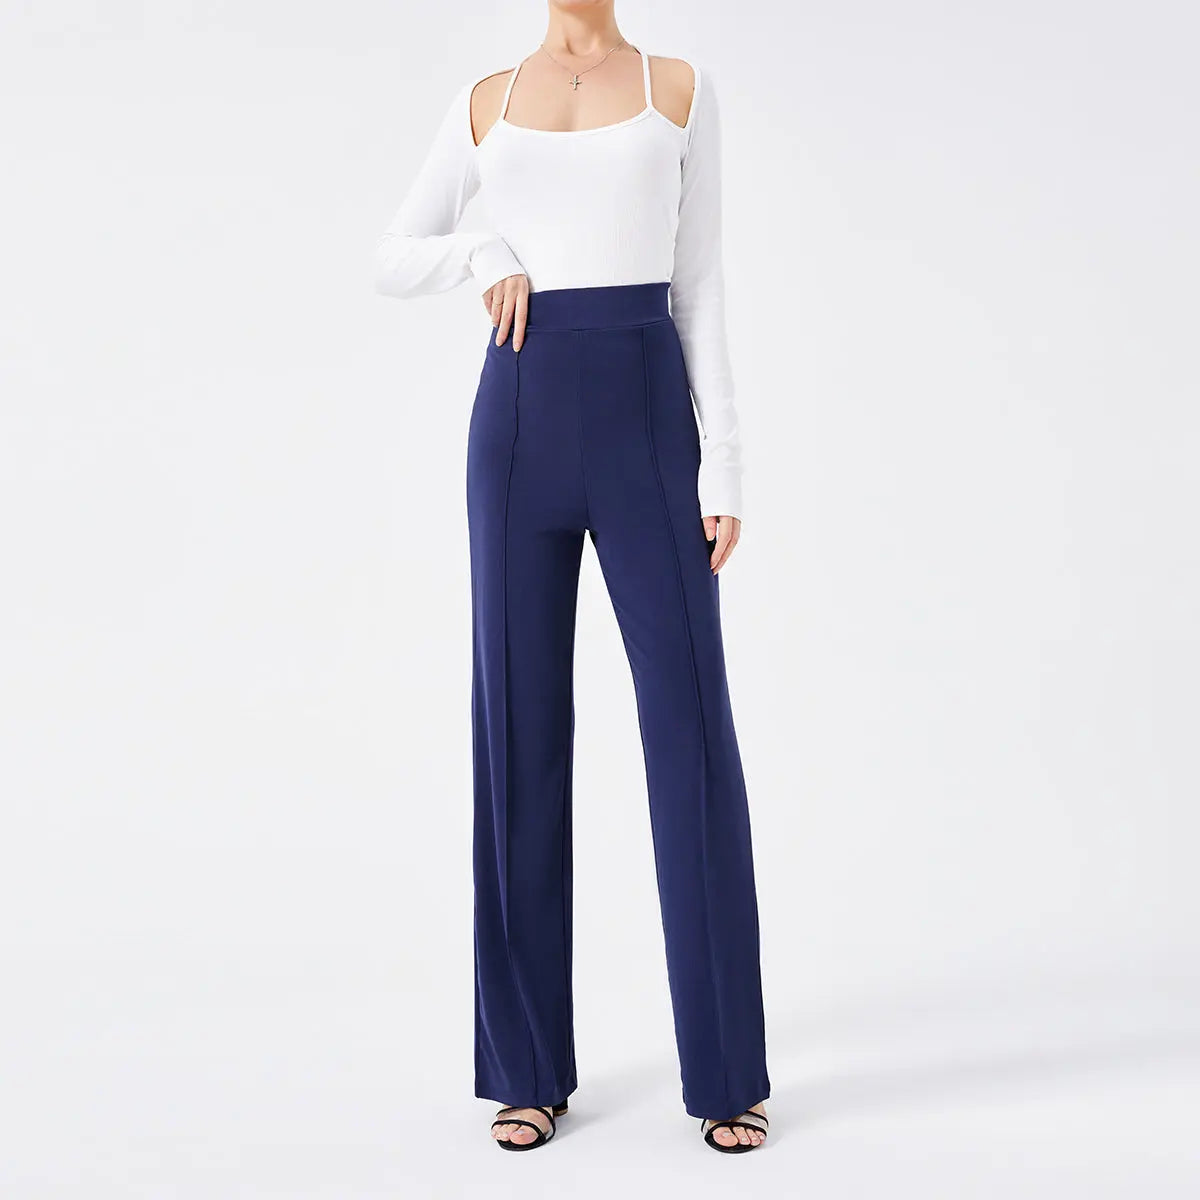 Solid Color Casual Pants Slim, High-waisted Bell Bottoms cj